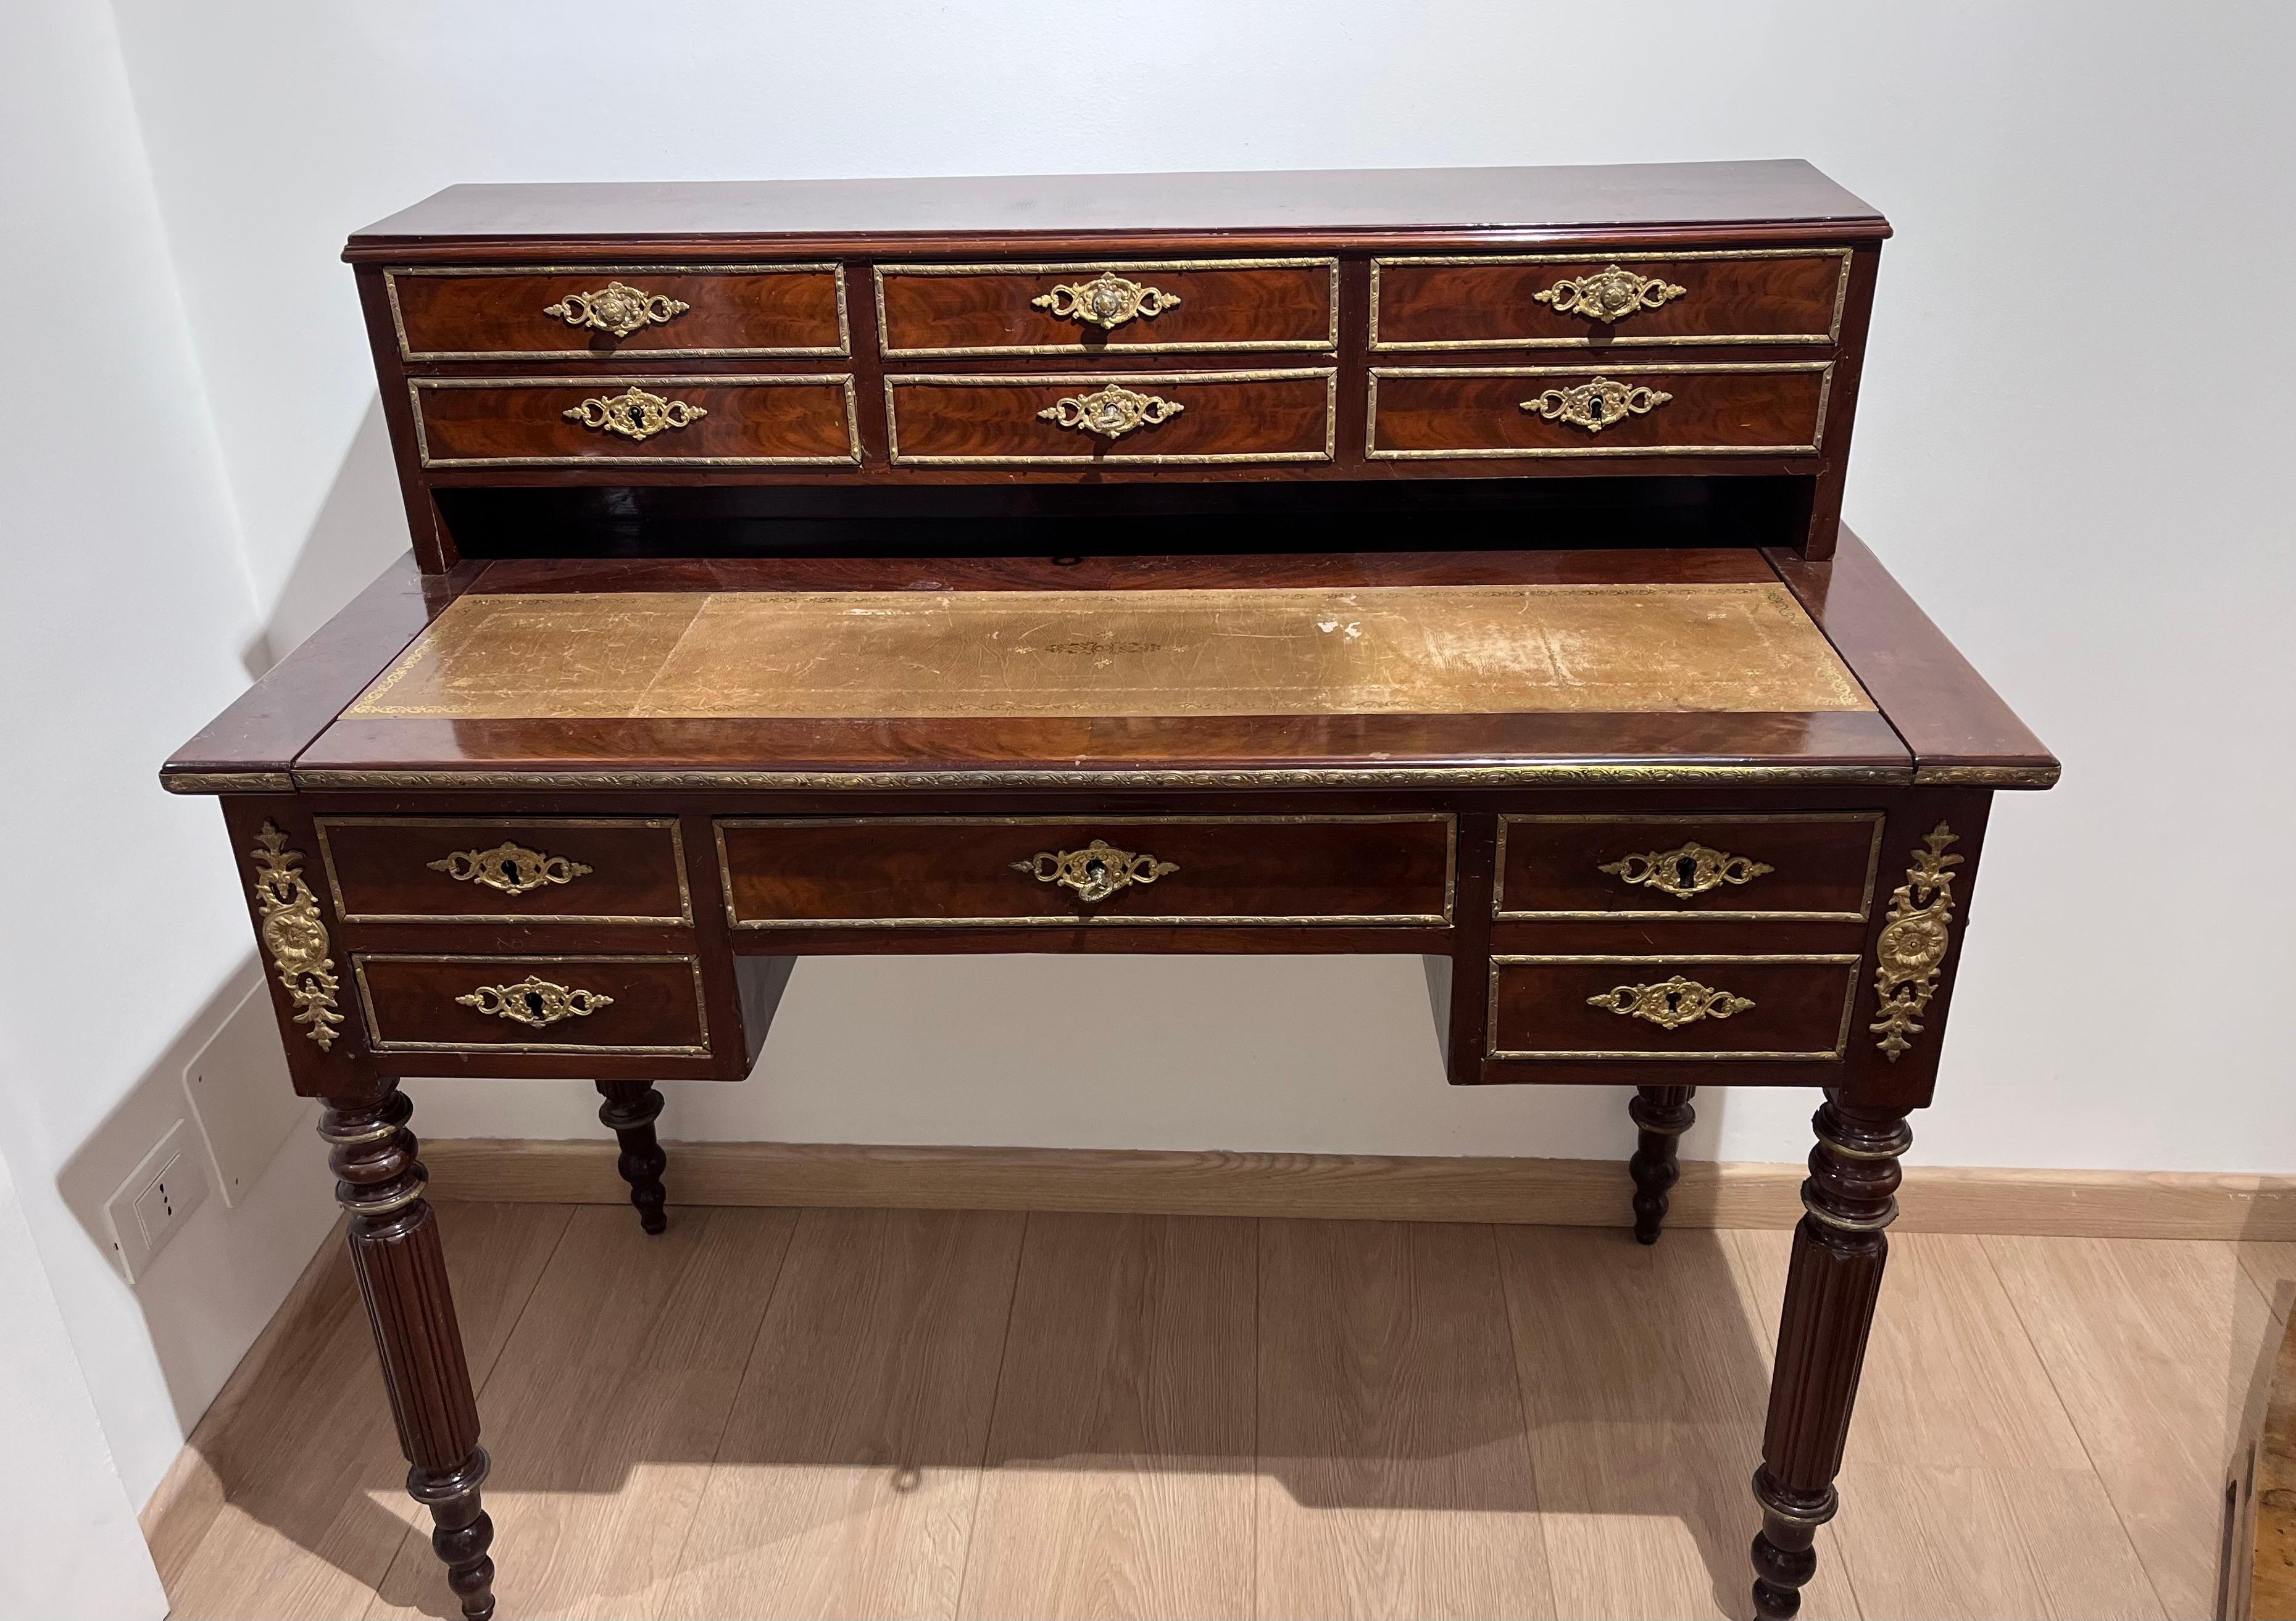 Beautiful mahogany feather wall desk from the second half of the 1800s from France, drawer interiors made of oak.

The desk is completely original is in good condition, 

The desk has a center top and sides that are removable the leather is slightly